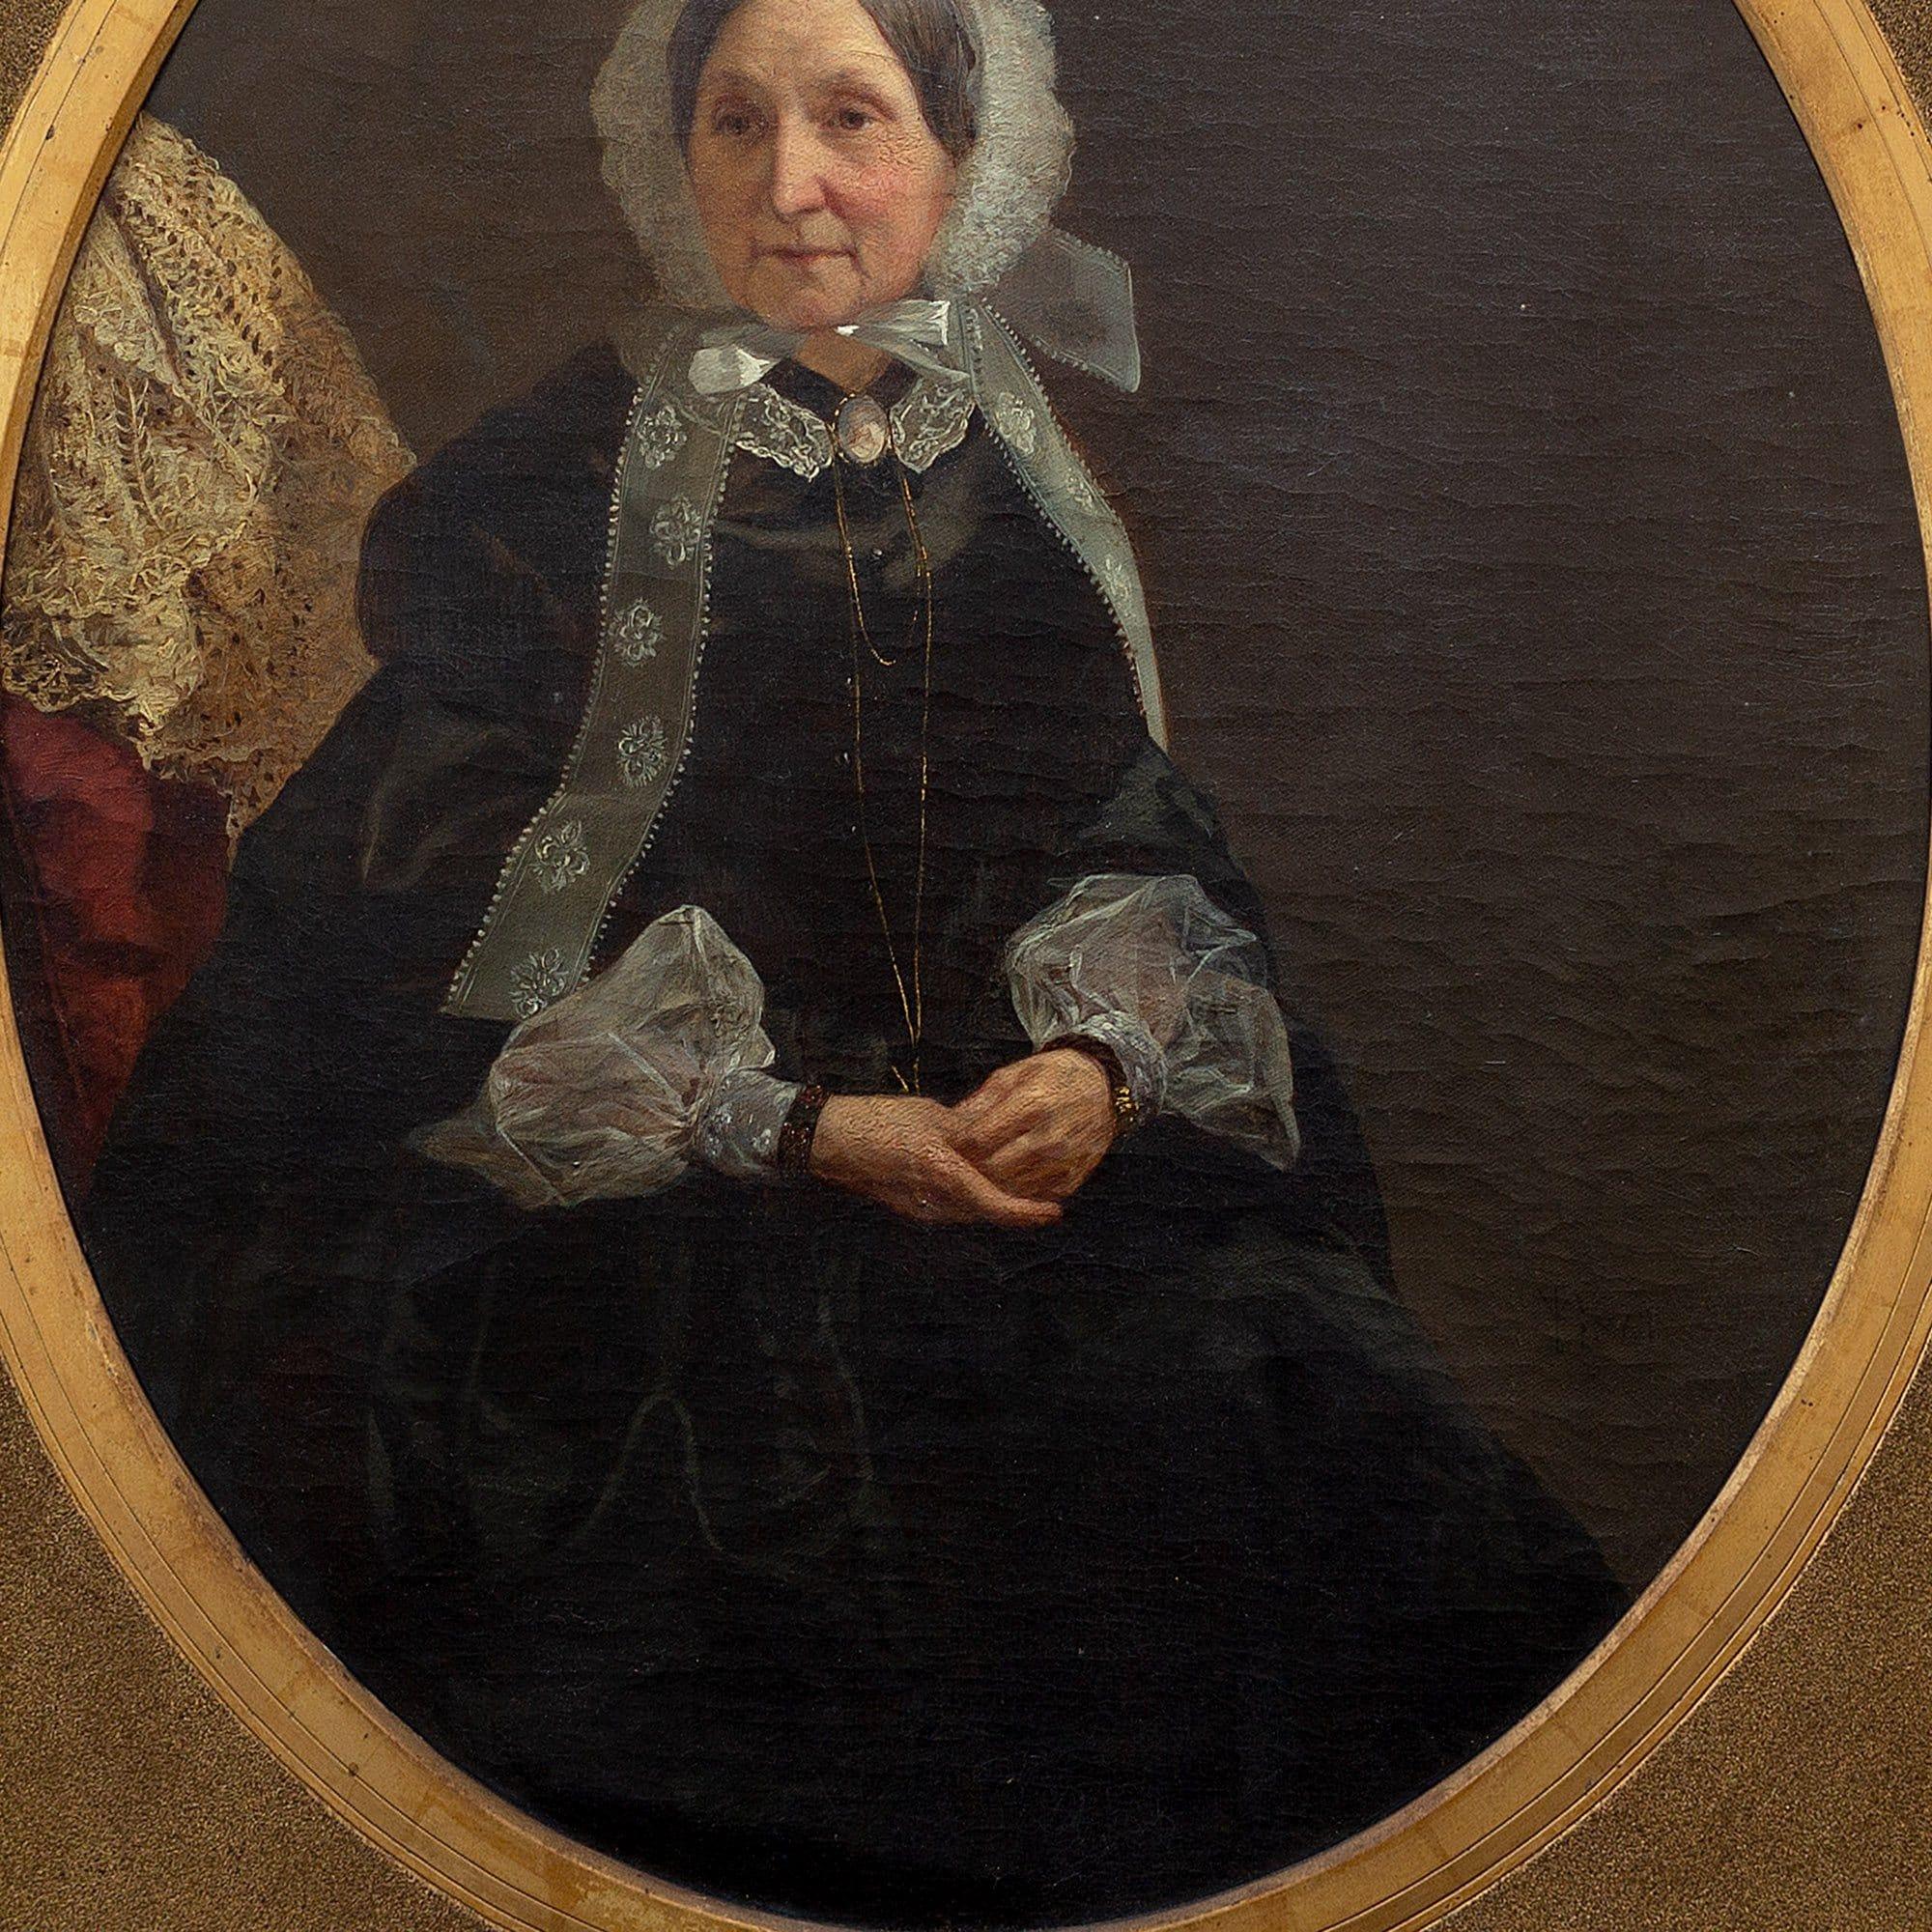 A fine mid-19th-century portrait of Mary Anne Boyce nee Jacob by English painter, Edwin Williams (c.1810-c.1880). The details are exquisite - note the attention to detail on the beautiful embroidered lace and resting hands.

Edwin Williams exhibited